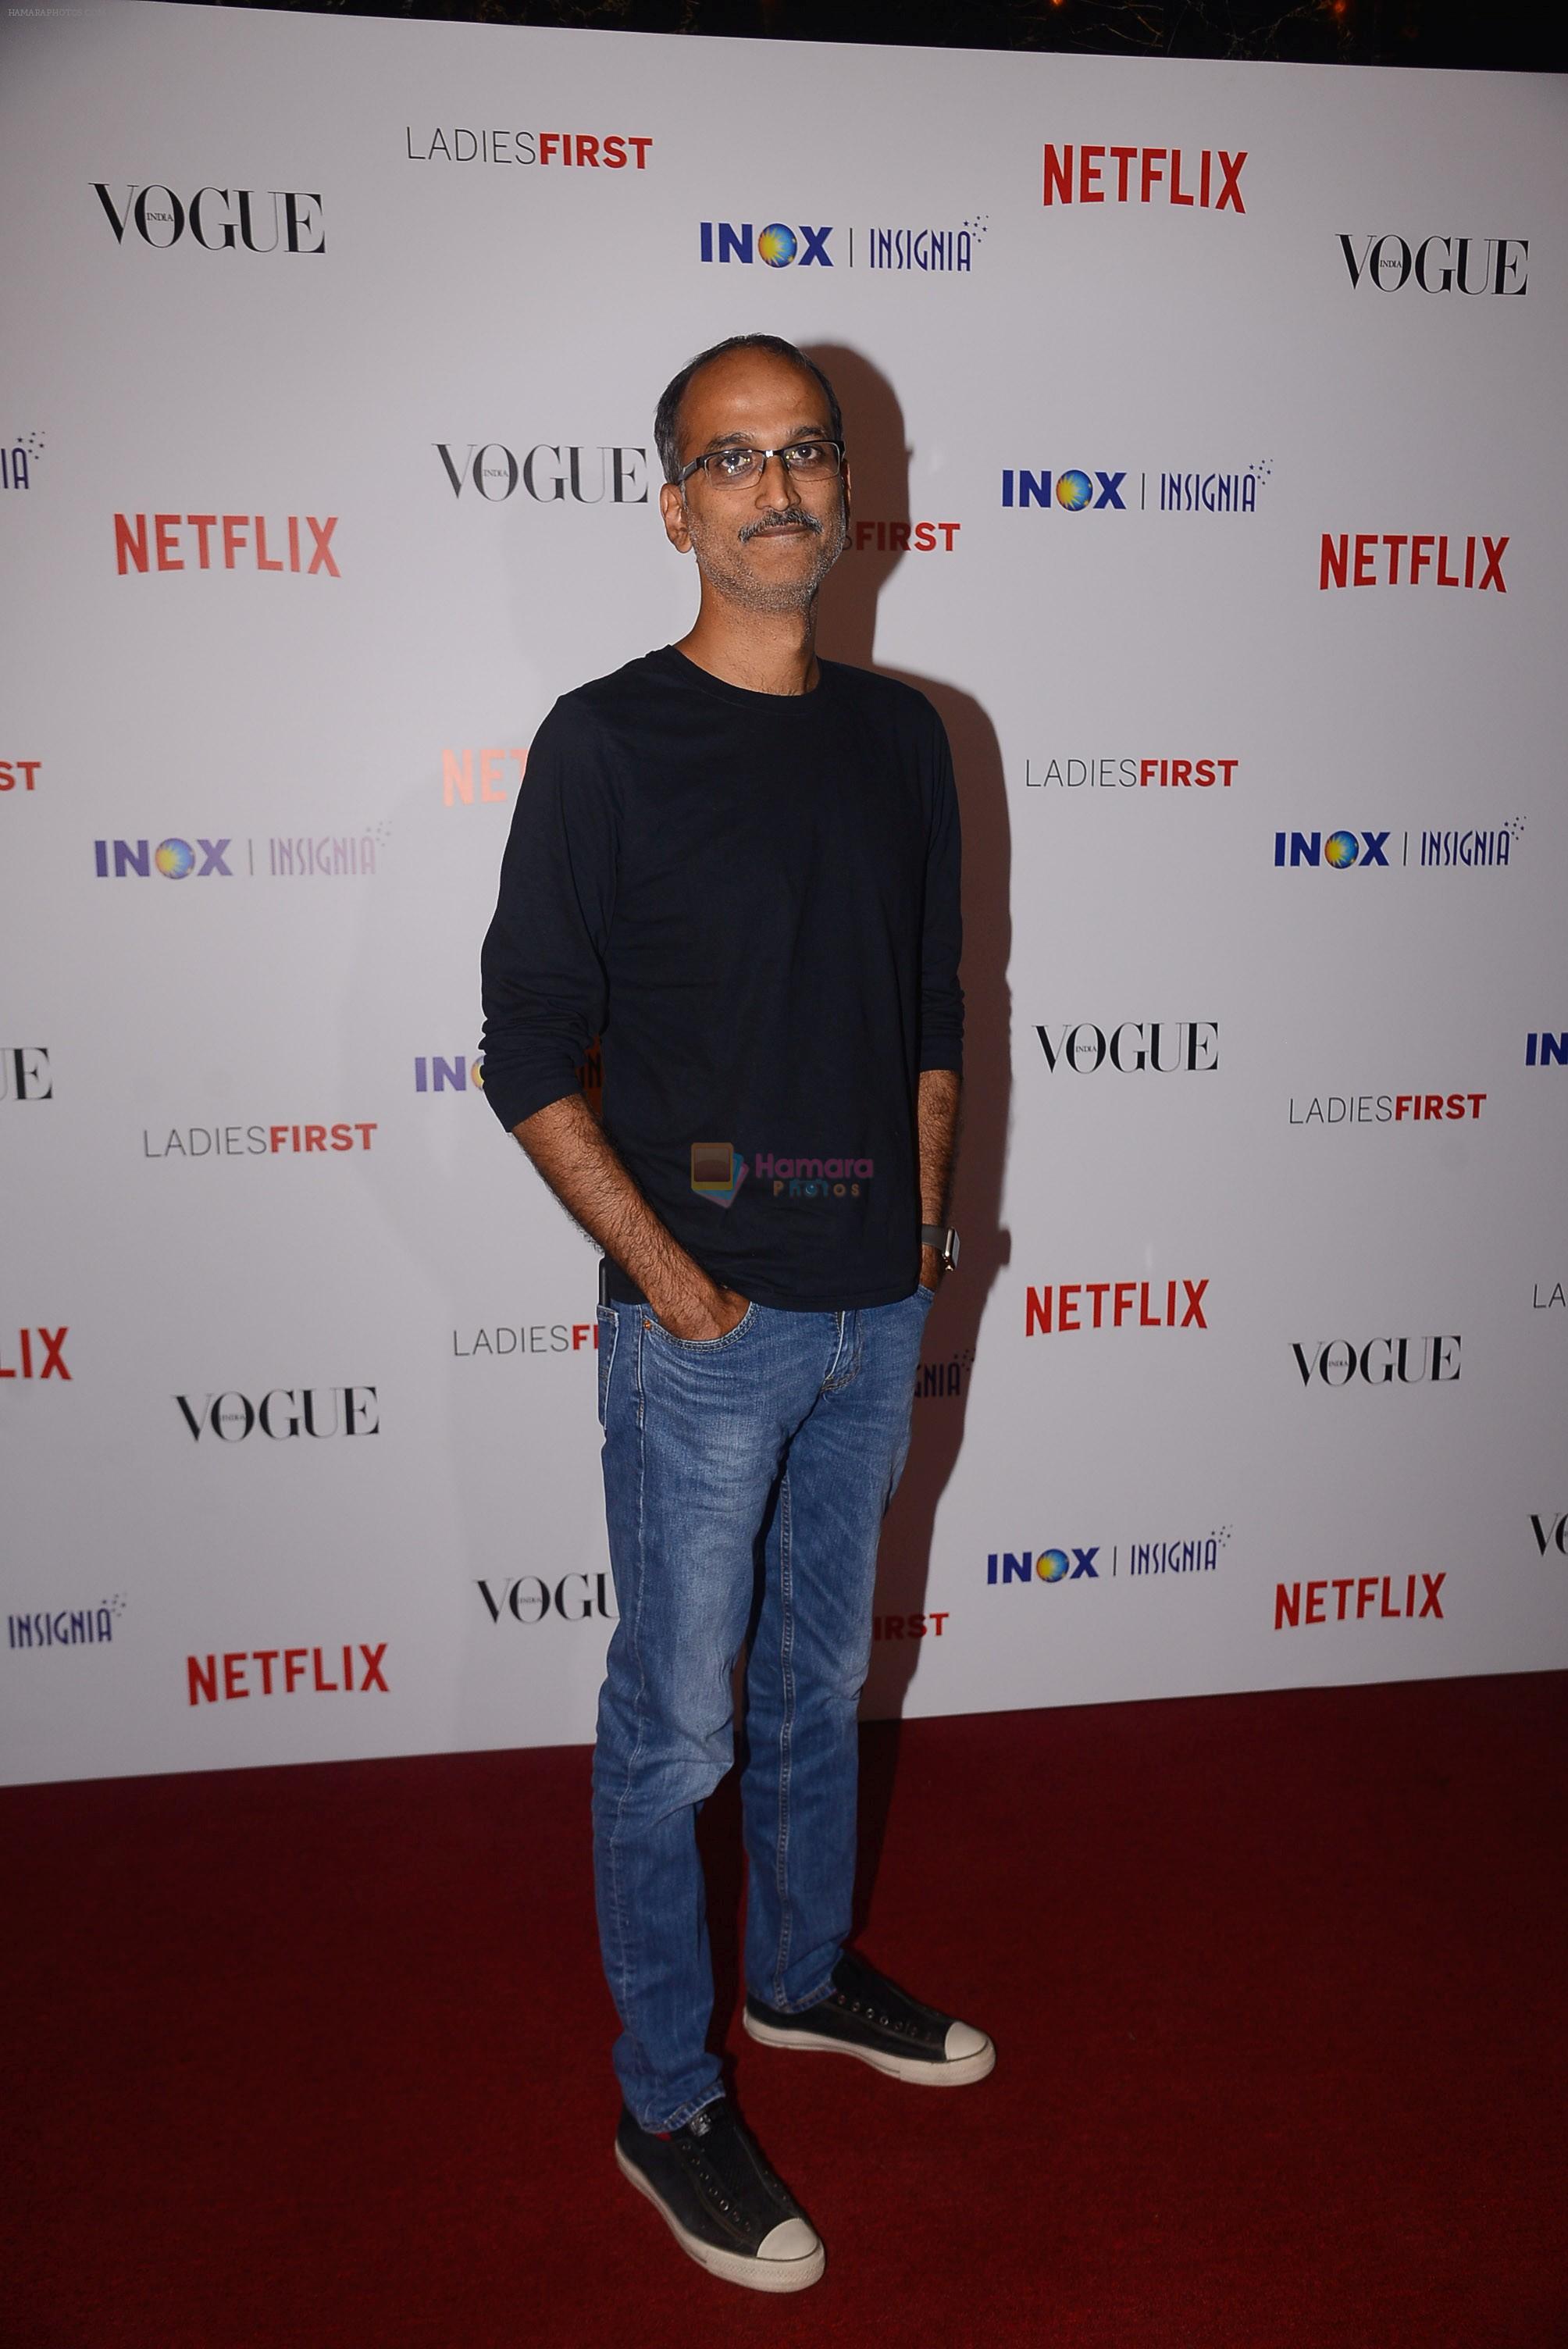 Rohan Sippy at the Premier of _Ladies First_- The First Original Netflix Documentary that chronicles the life of World No 1 Archer, Deepika Kumari on 8th March 2018